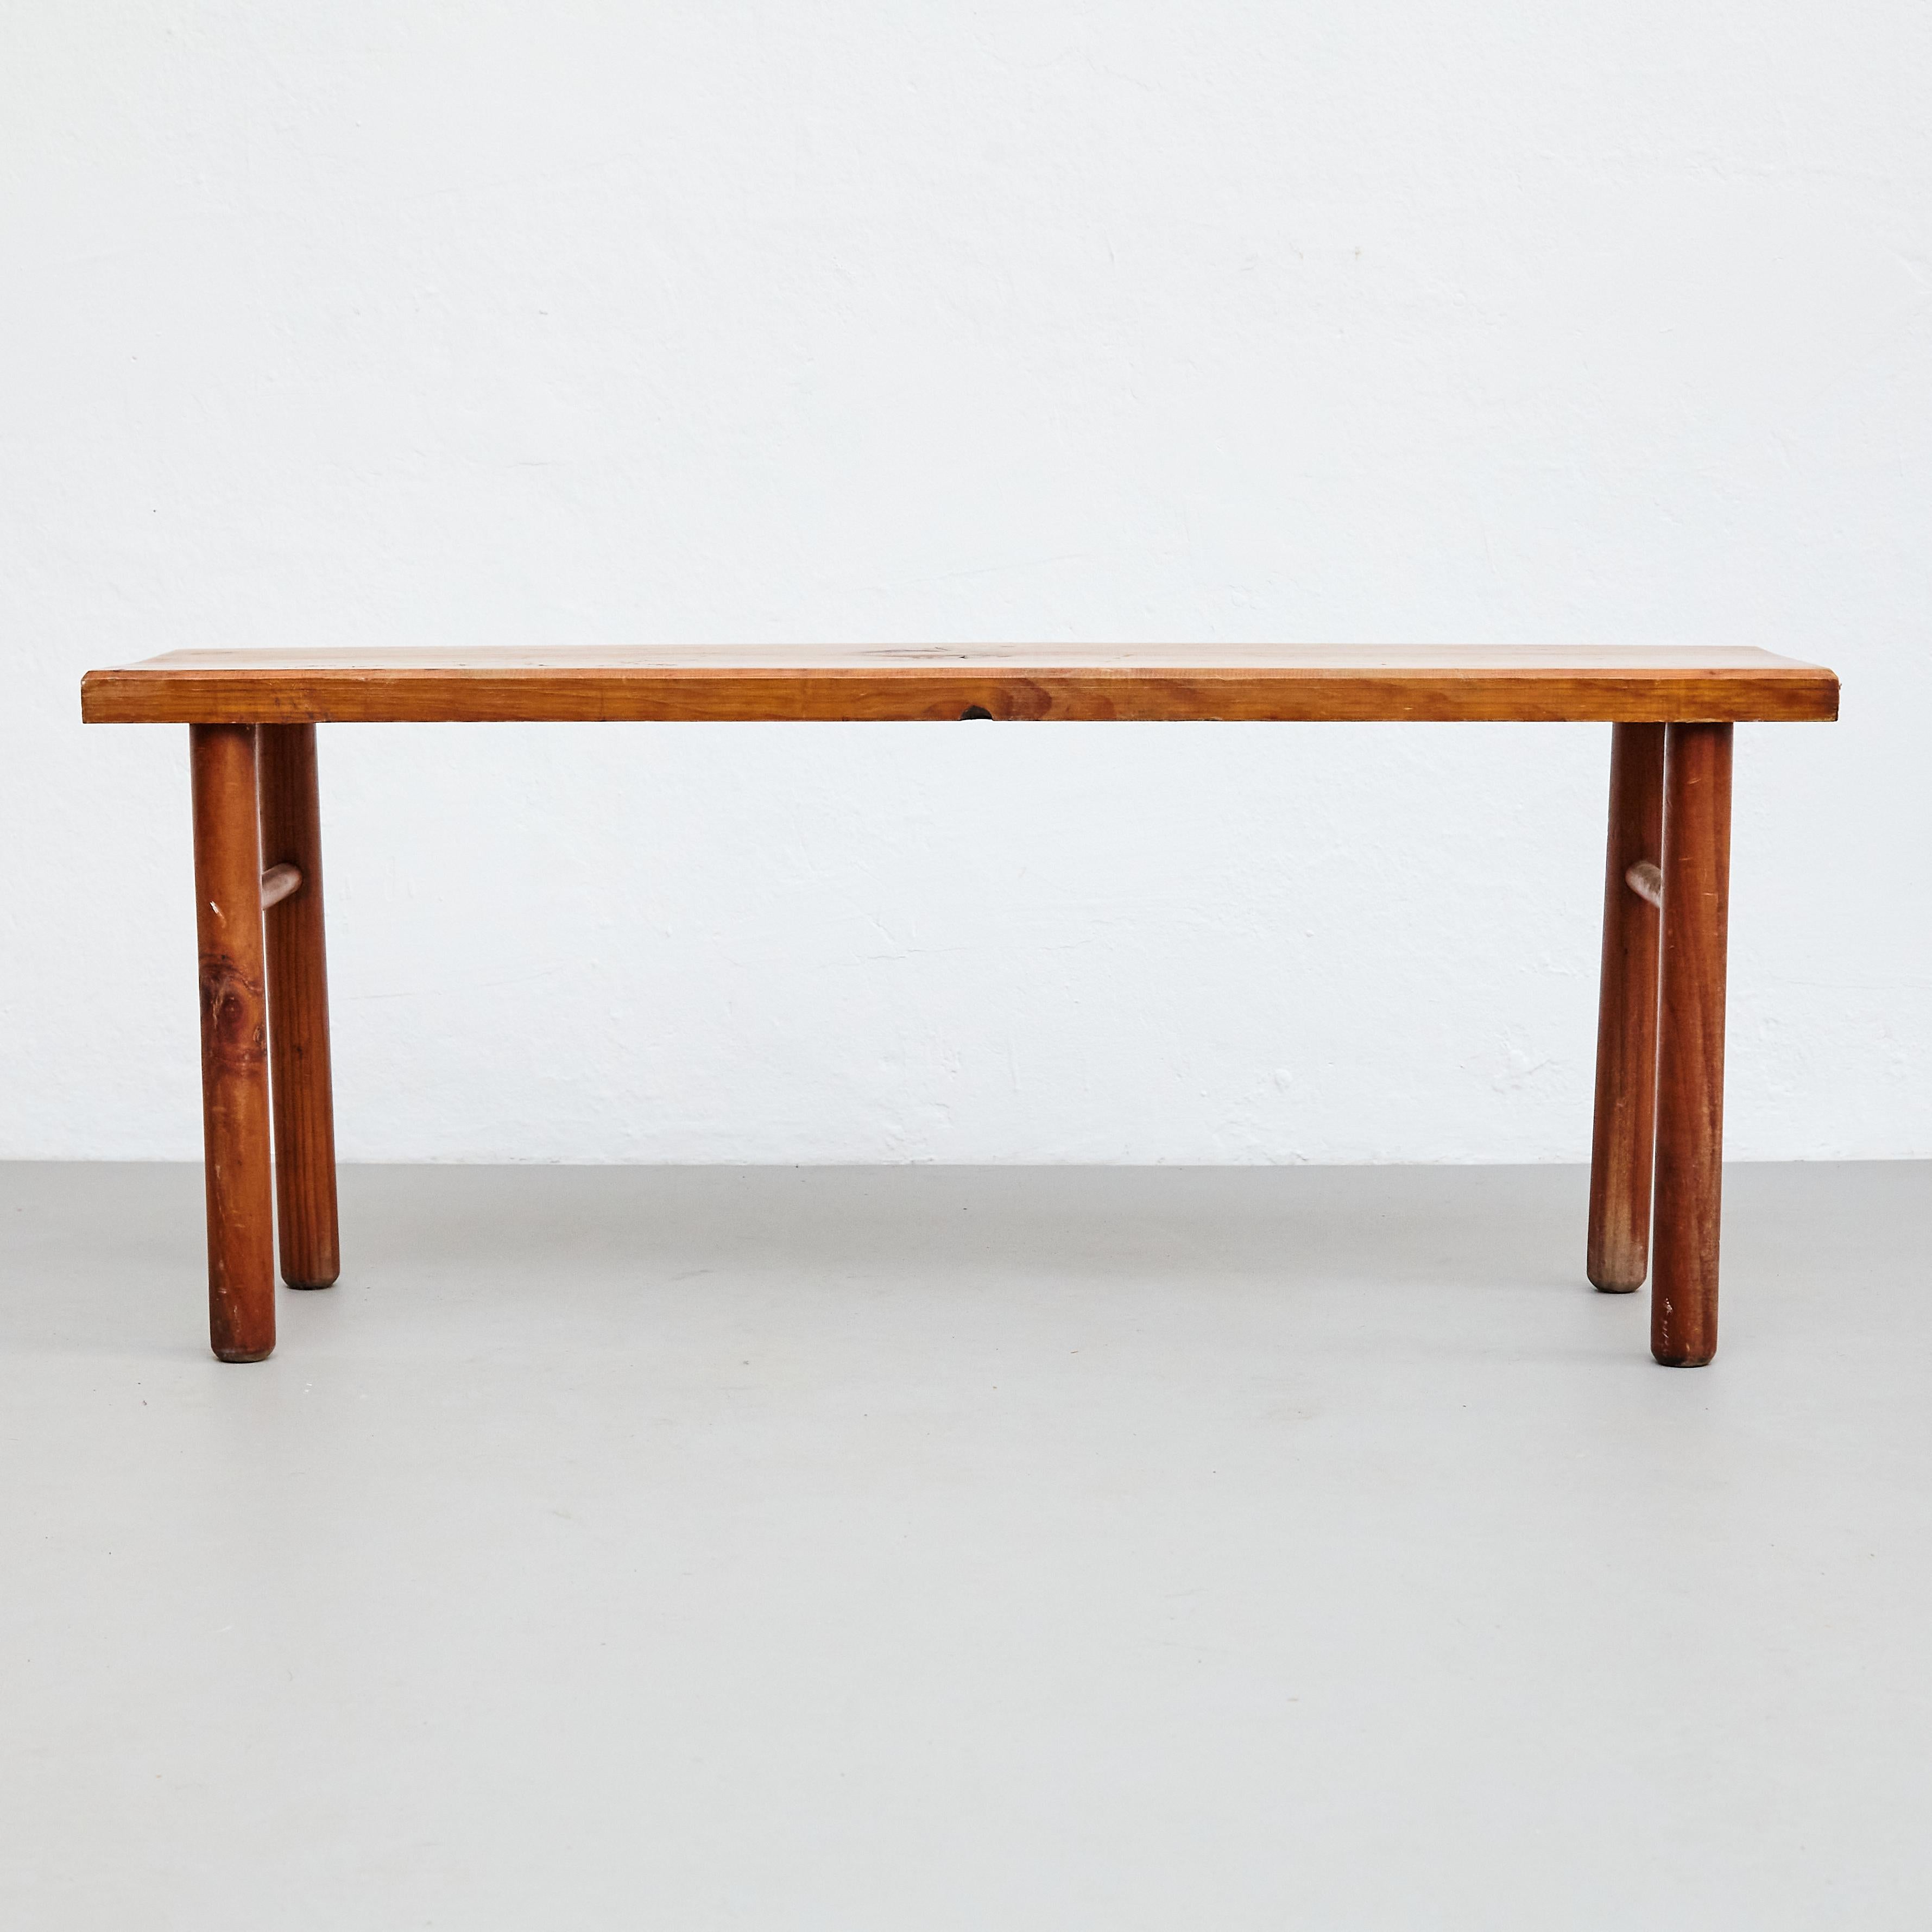 Rationalist Mid-Century Modern French Wood Bench, circa 1960 In Good Condition For Sale In Barcelona, Barcelona